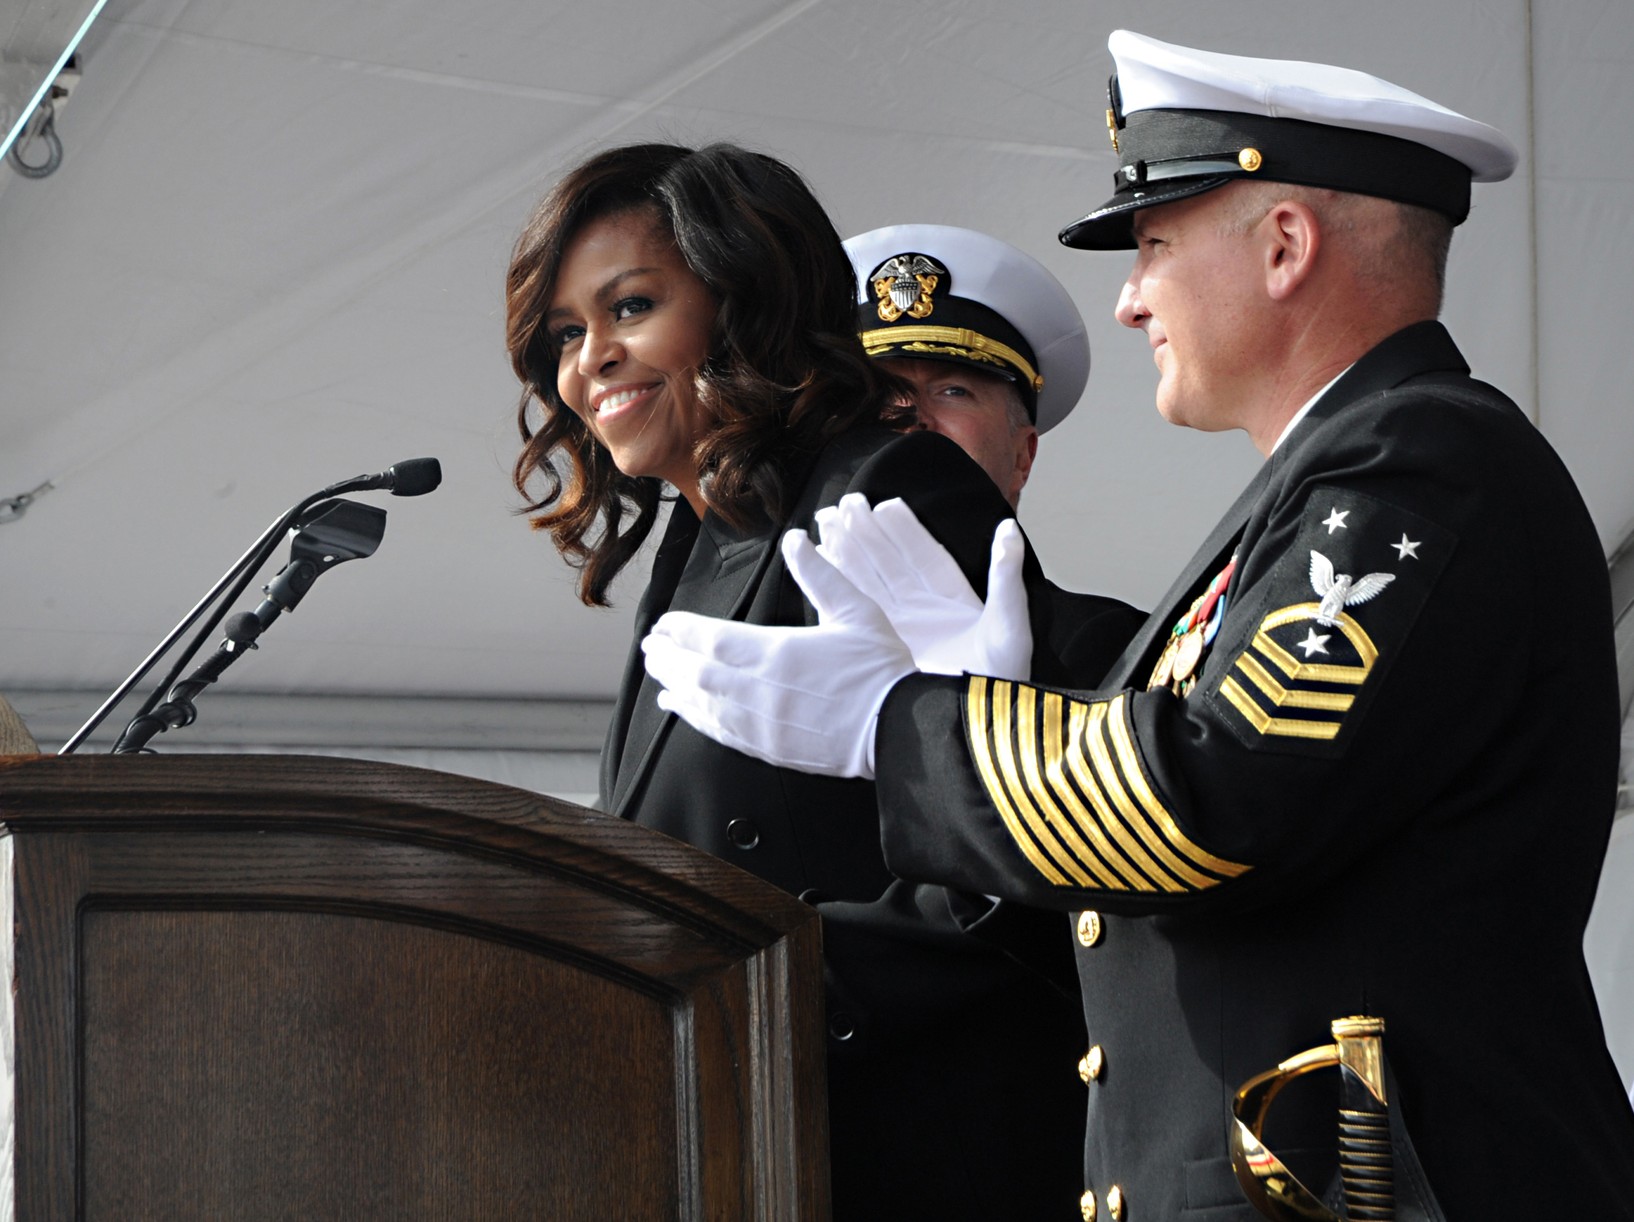 ssn-786 uss illinois virginia class attack submarine us navy 02 commissioning ceremony michelle obama groton